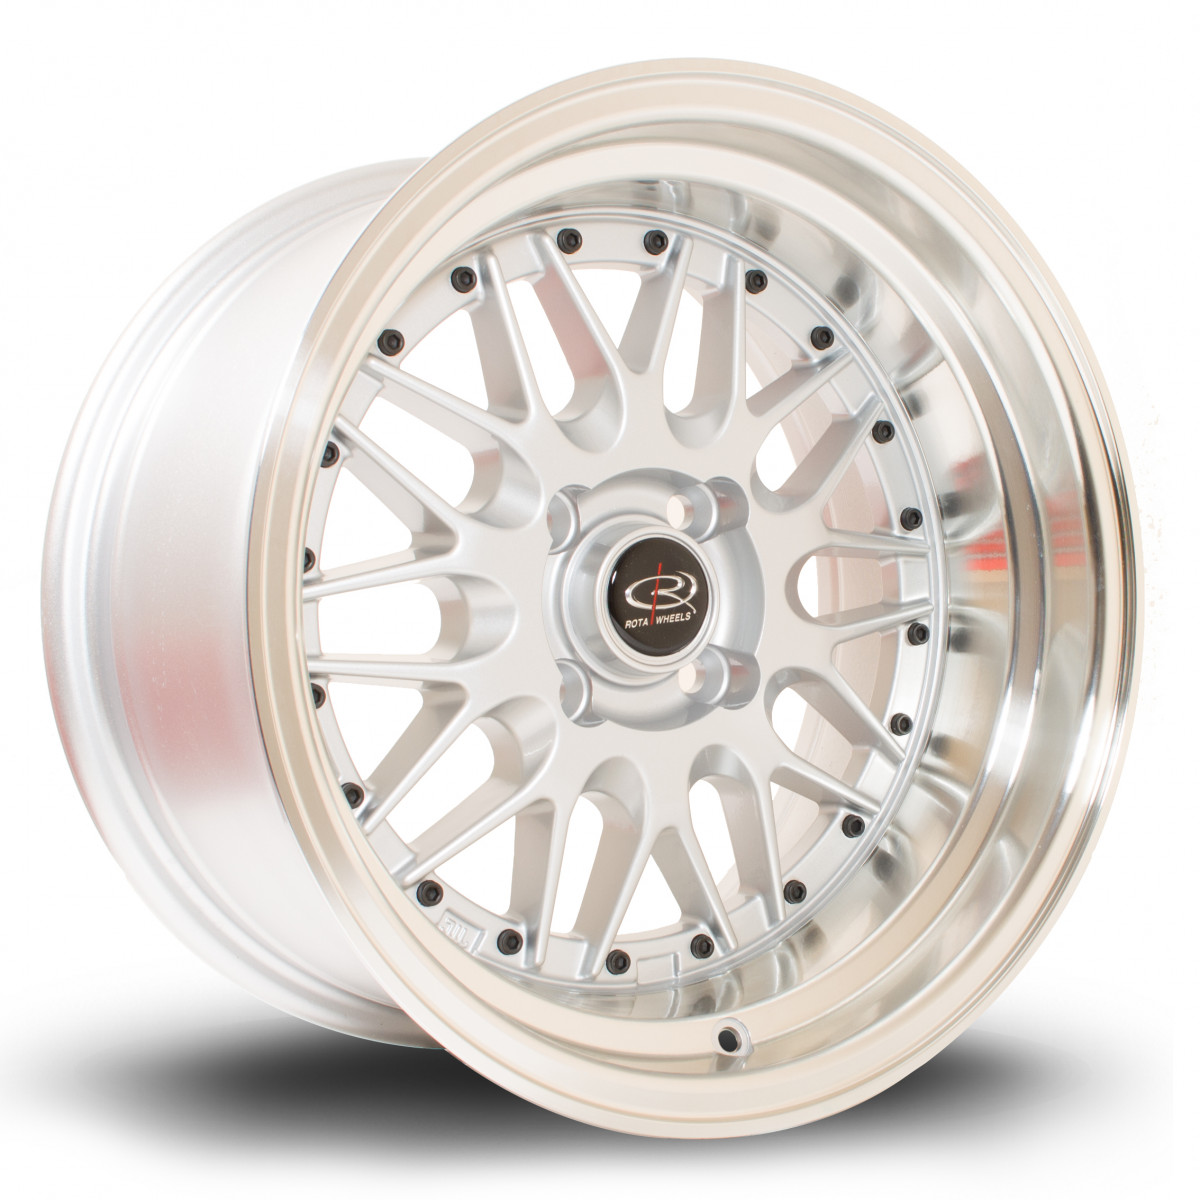 Kensei 15x8 4x114 ET0 Silver with Polished Lip